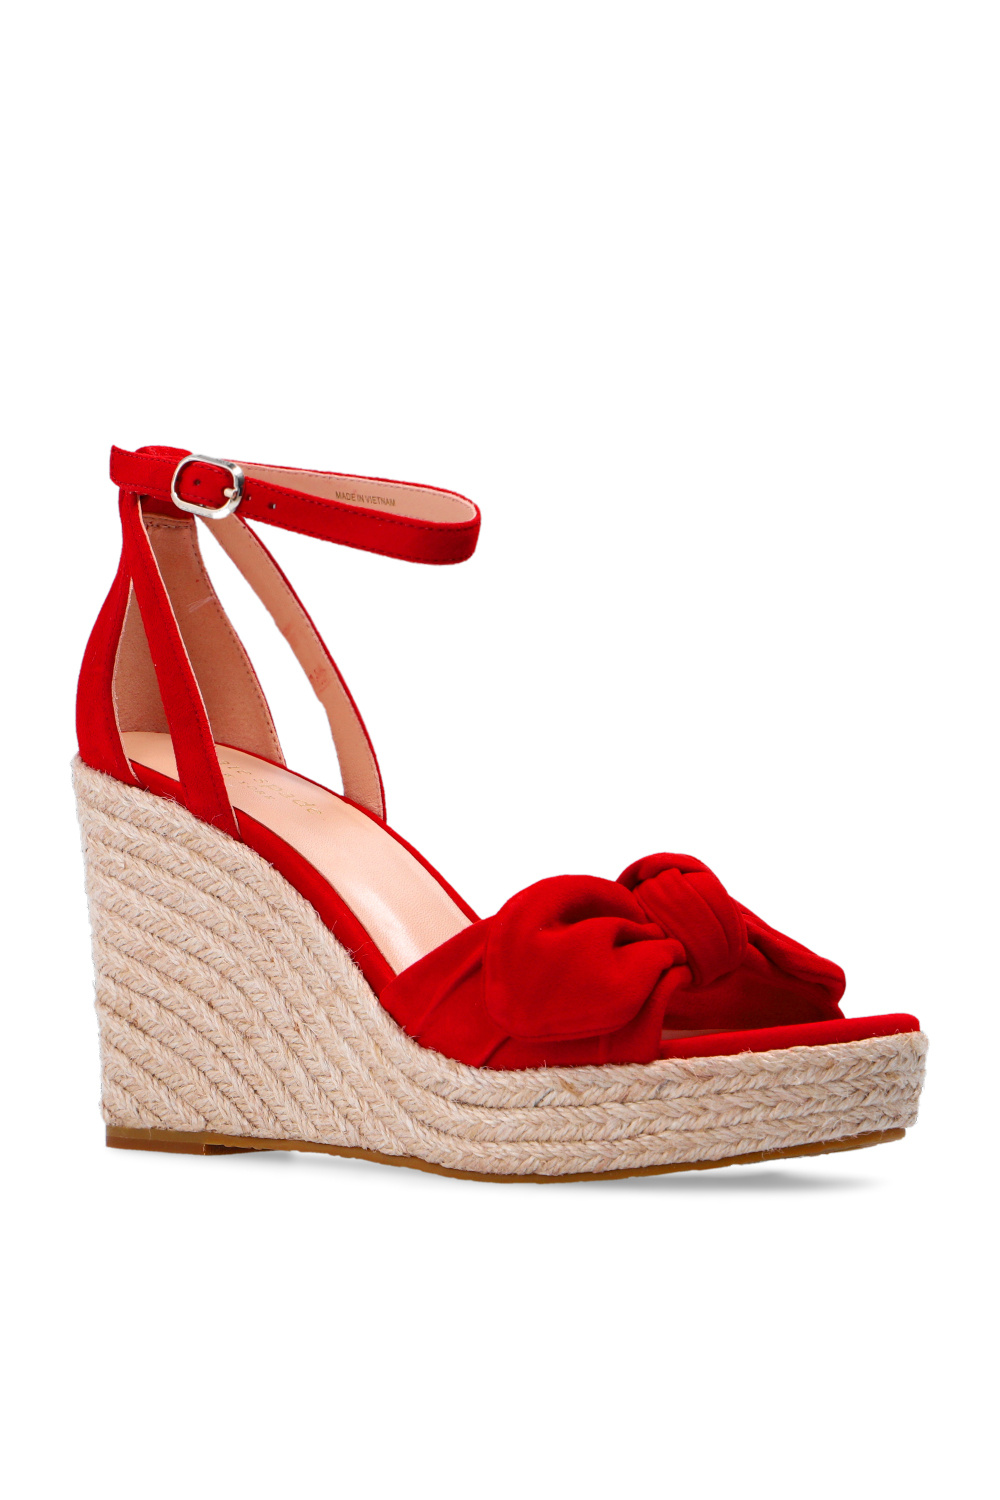 Louis Vuitton Wedge Sandals Red / White Size 37